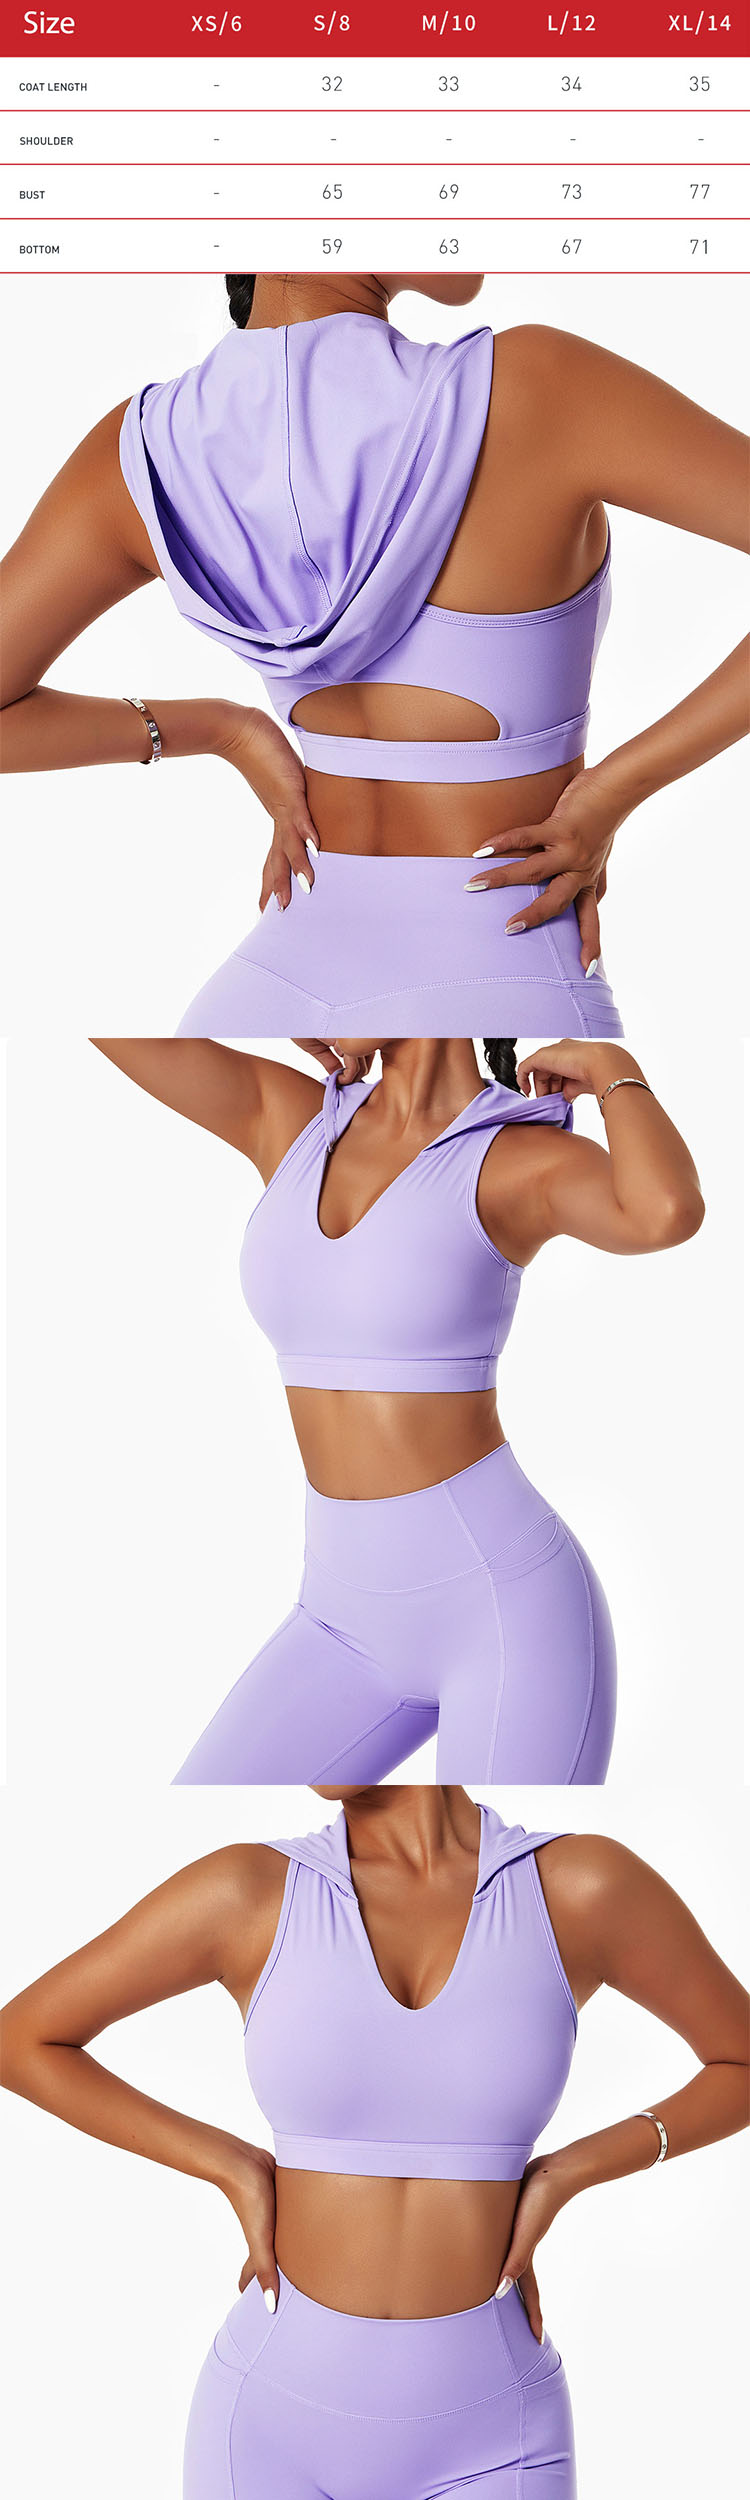 Hooded sports bra dominated by a simple silhouette